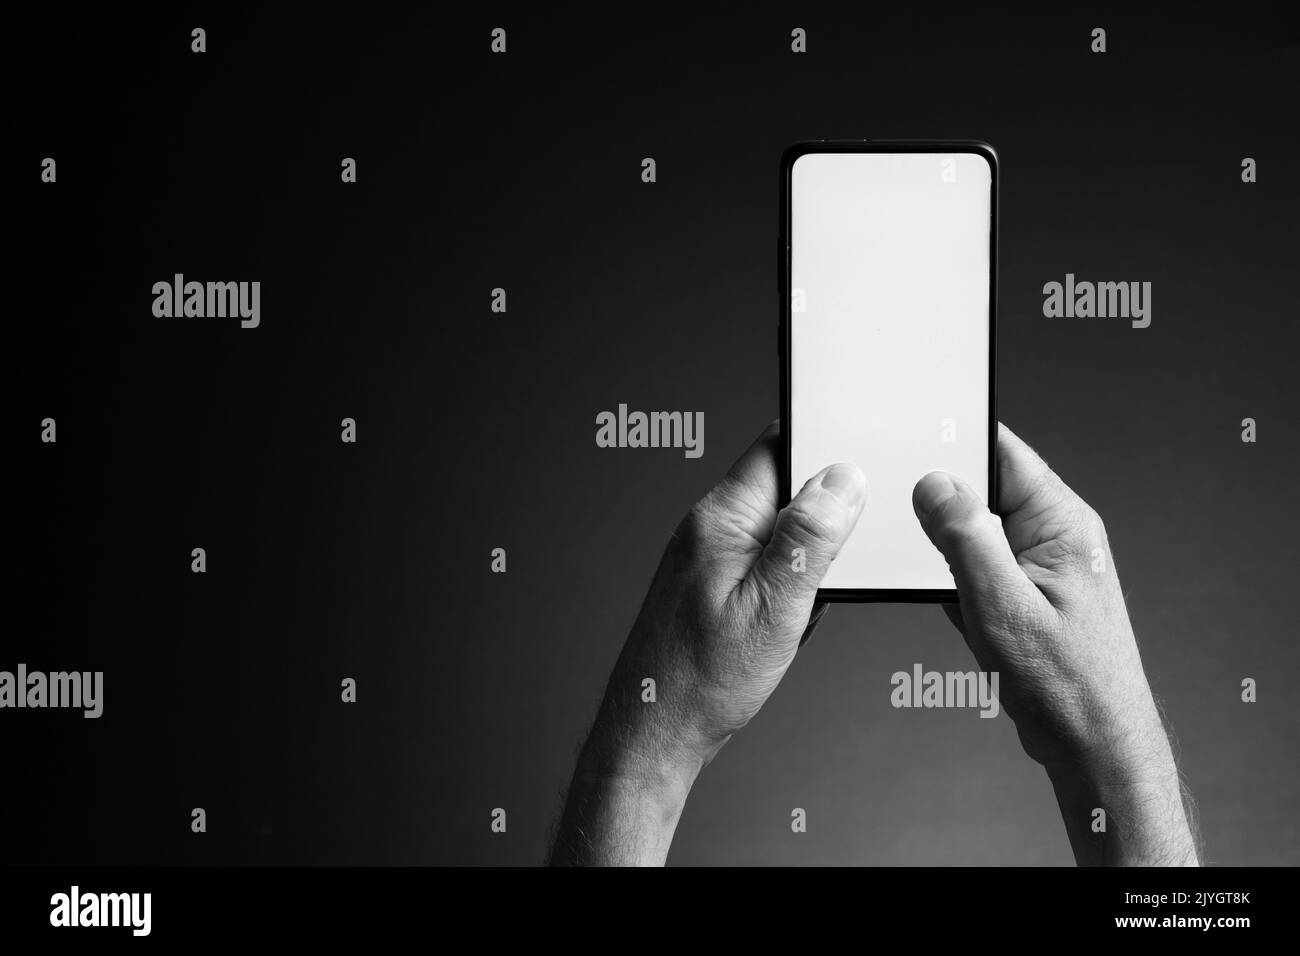 Black and white image of man's hands holding smart phone and texting with blank white screen isolated on dark background with copy space Stock Photo